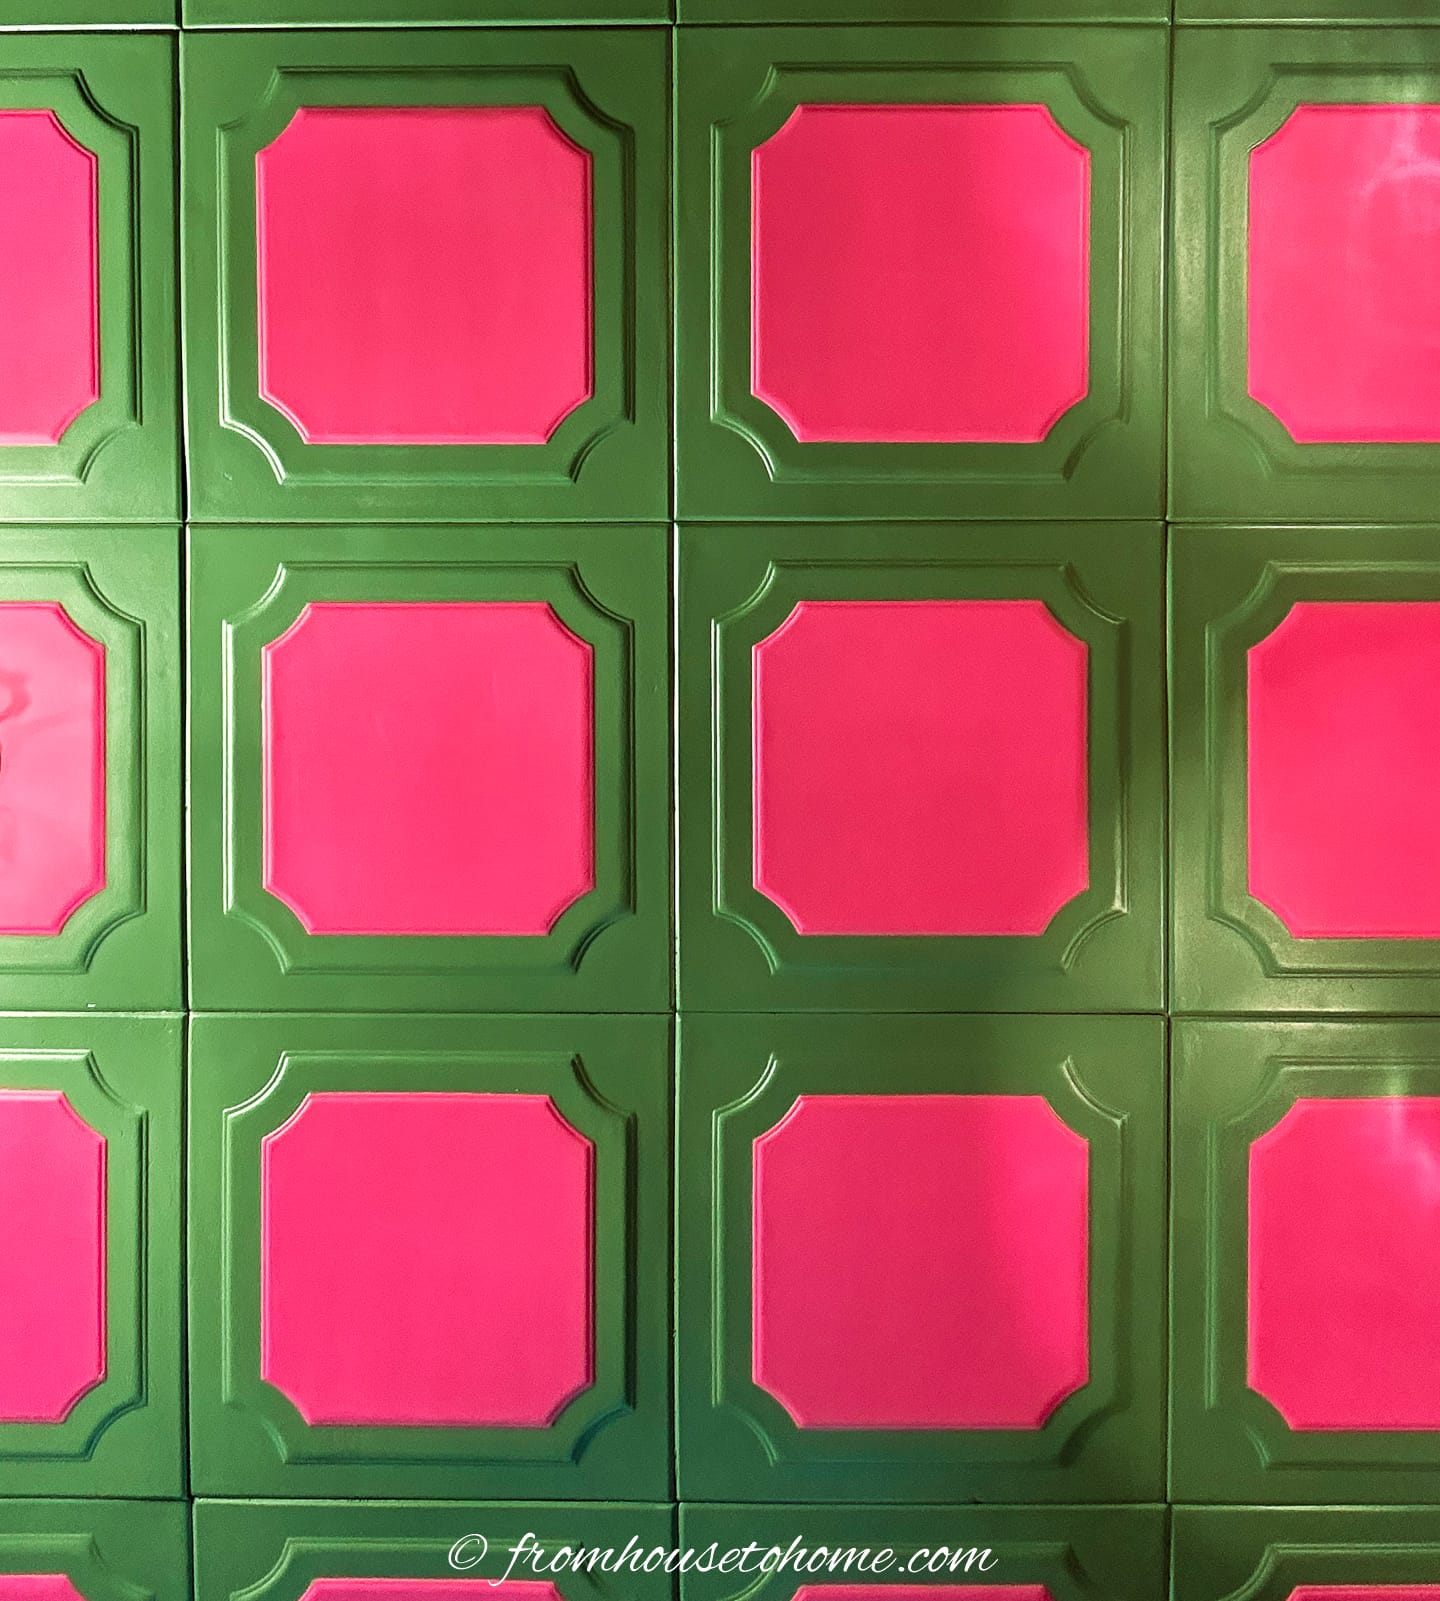 A green and pink tiled ceiling with squares.